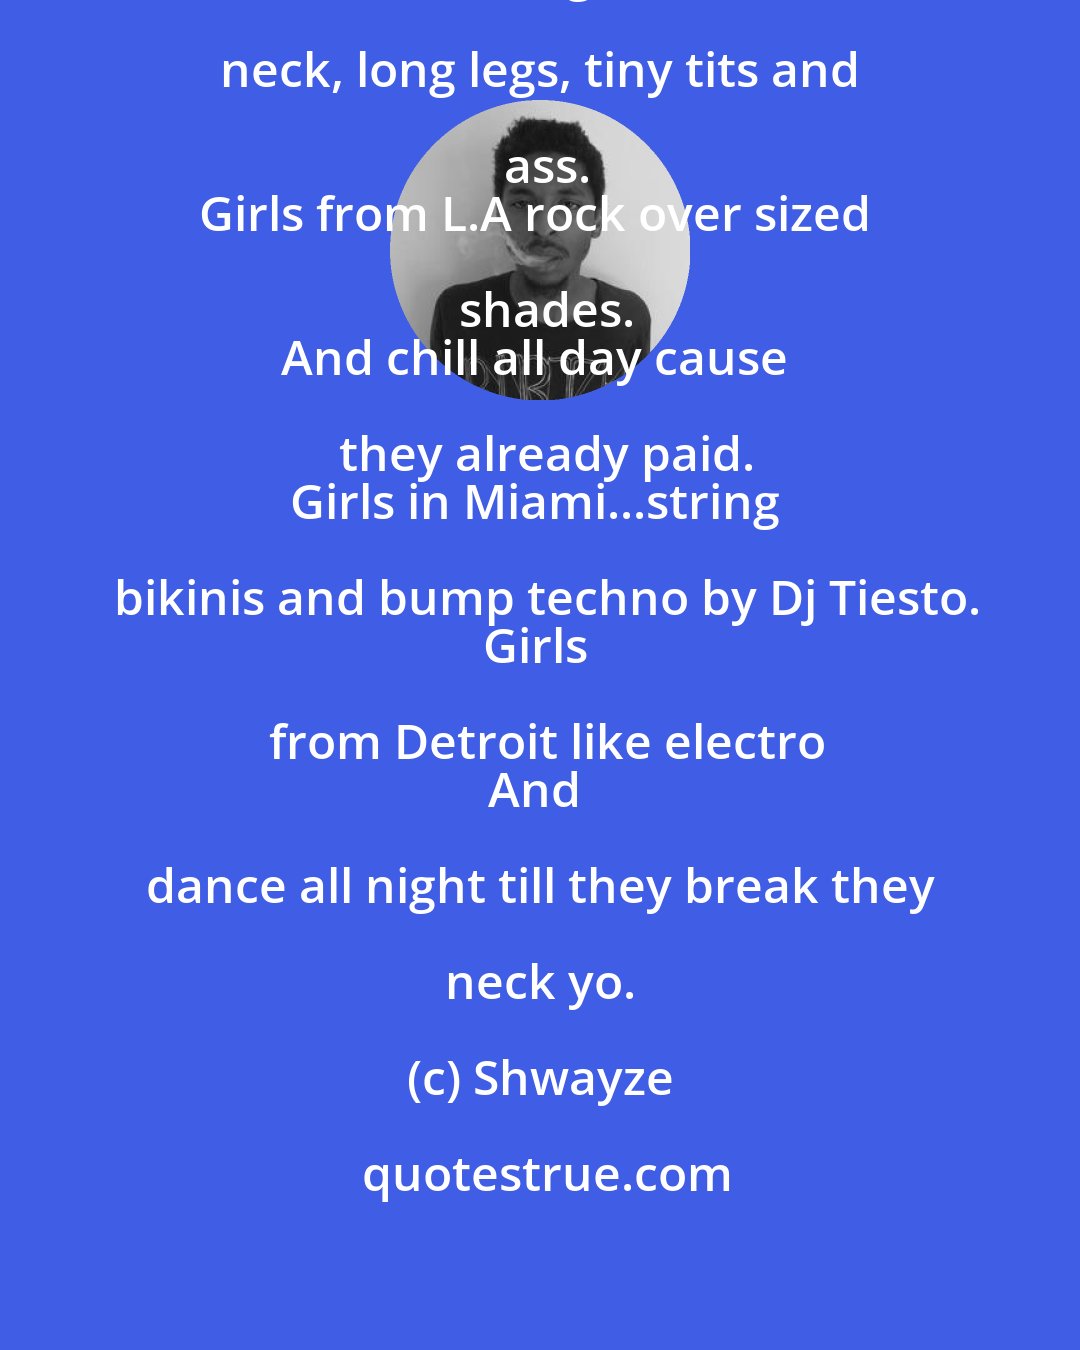 Shwayze: Girls in New York look like giraffes.
Long neck, long legs, tiny tits and ass.
Girls from L.A rock over sized shades.
And chill all day cause they already paid.
Girls in Miami...string bikinis and bump techno by Dj Tiesto.
Girls from Detroit like electro
And dance all night till they break they neck yo.